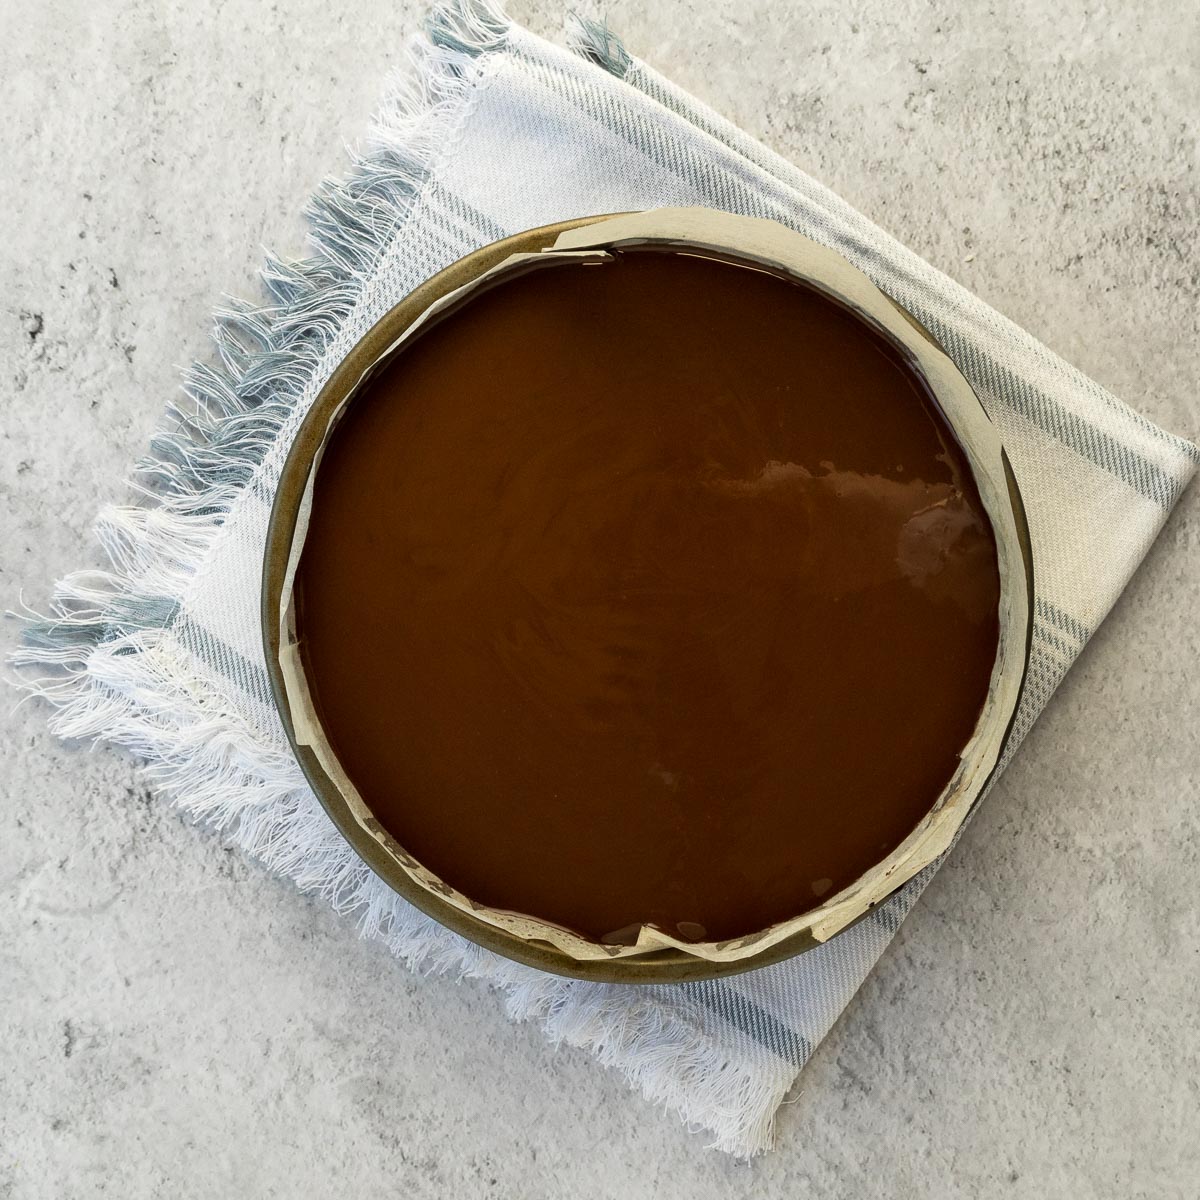 Chocolate topping poured over the caramel